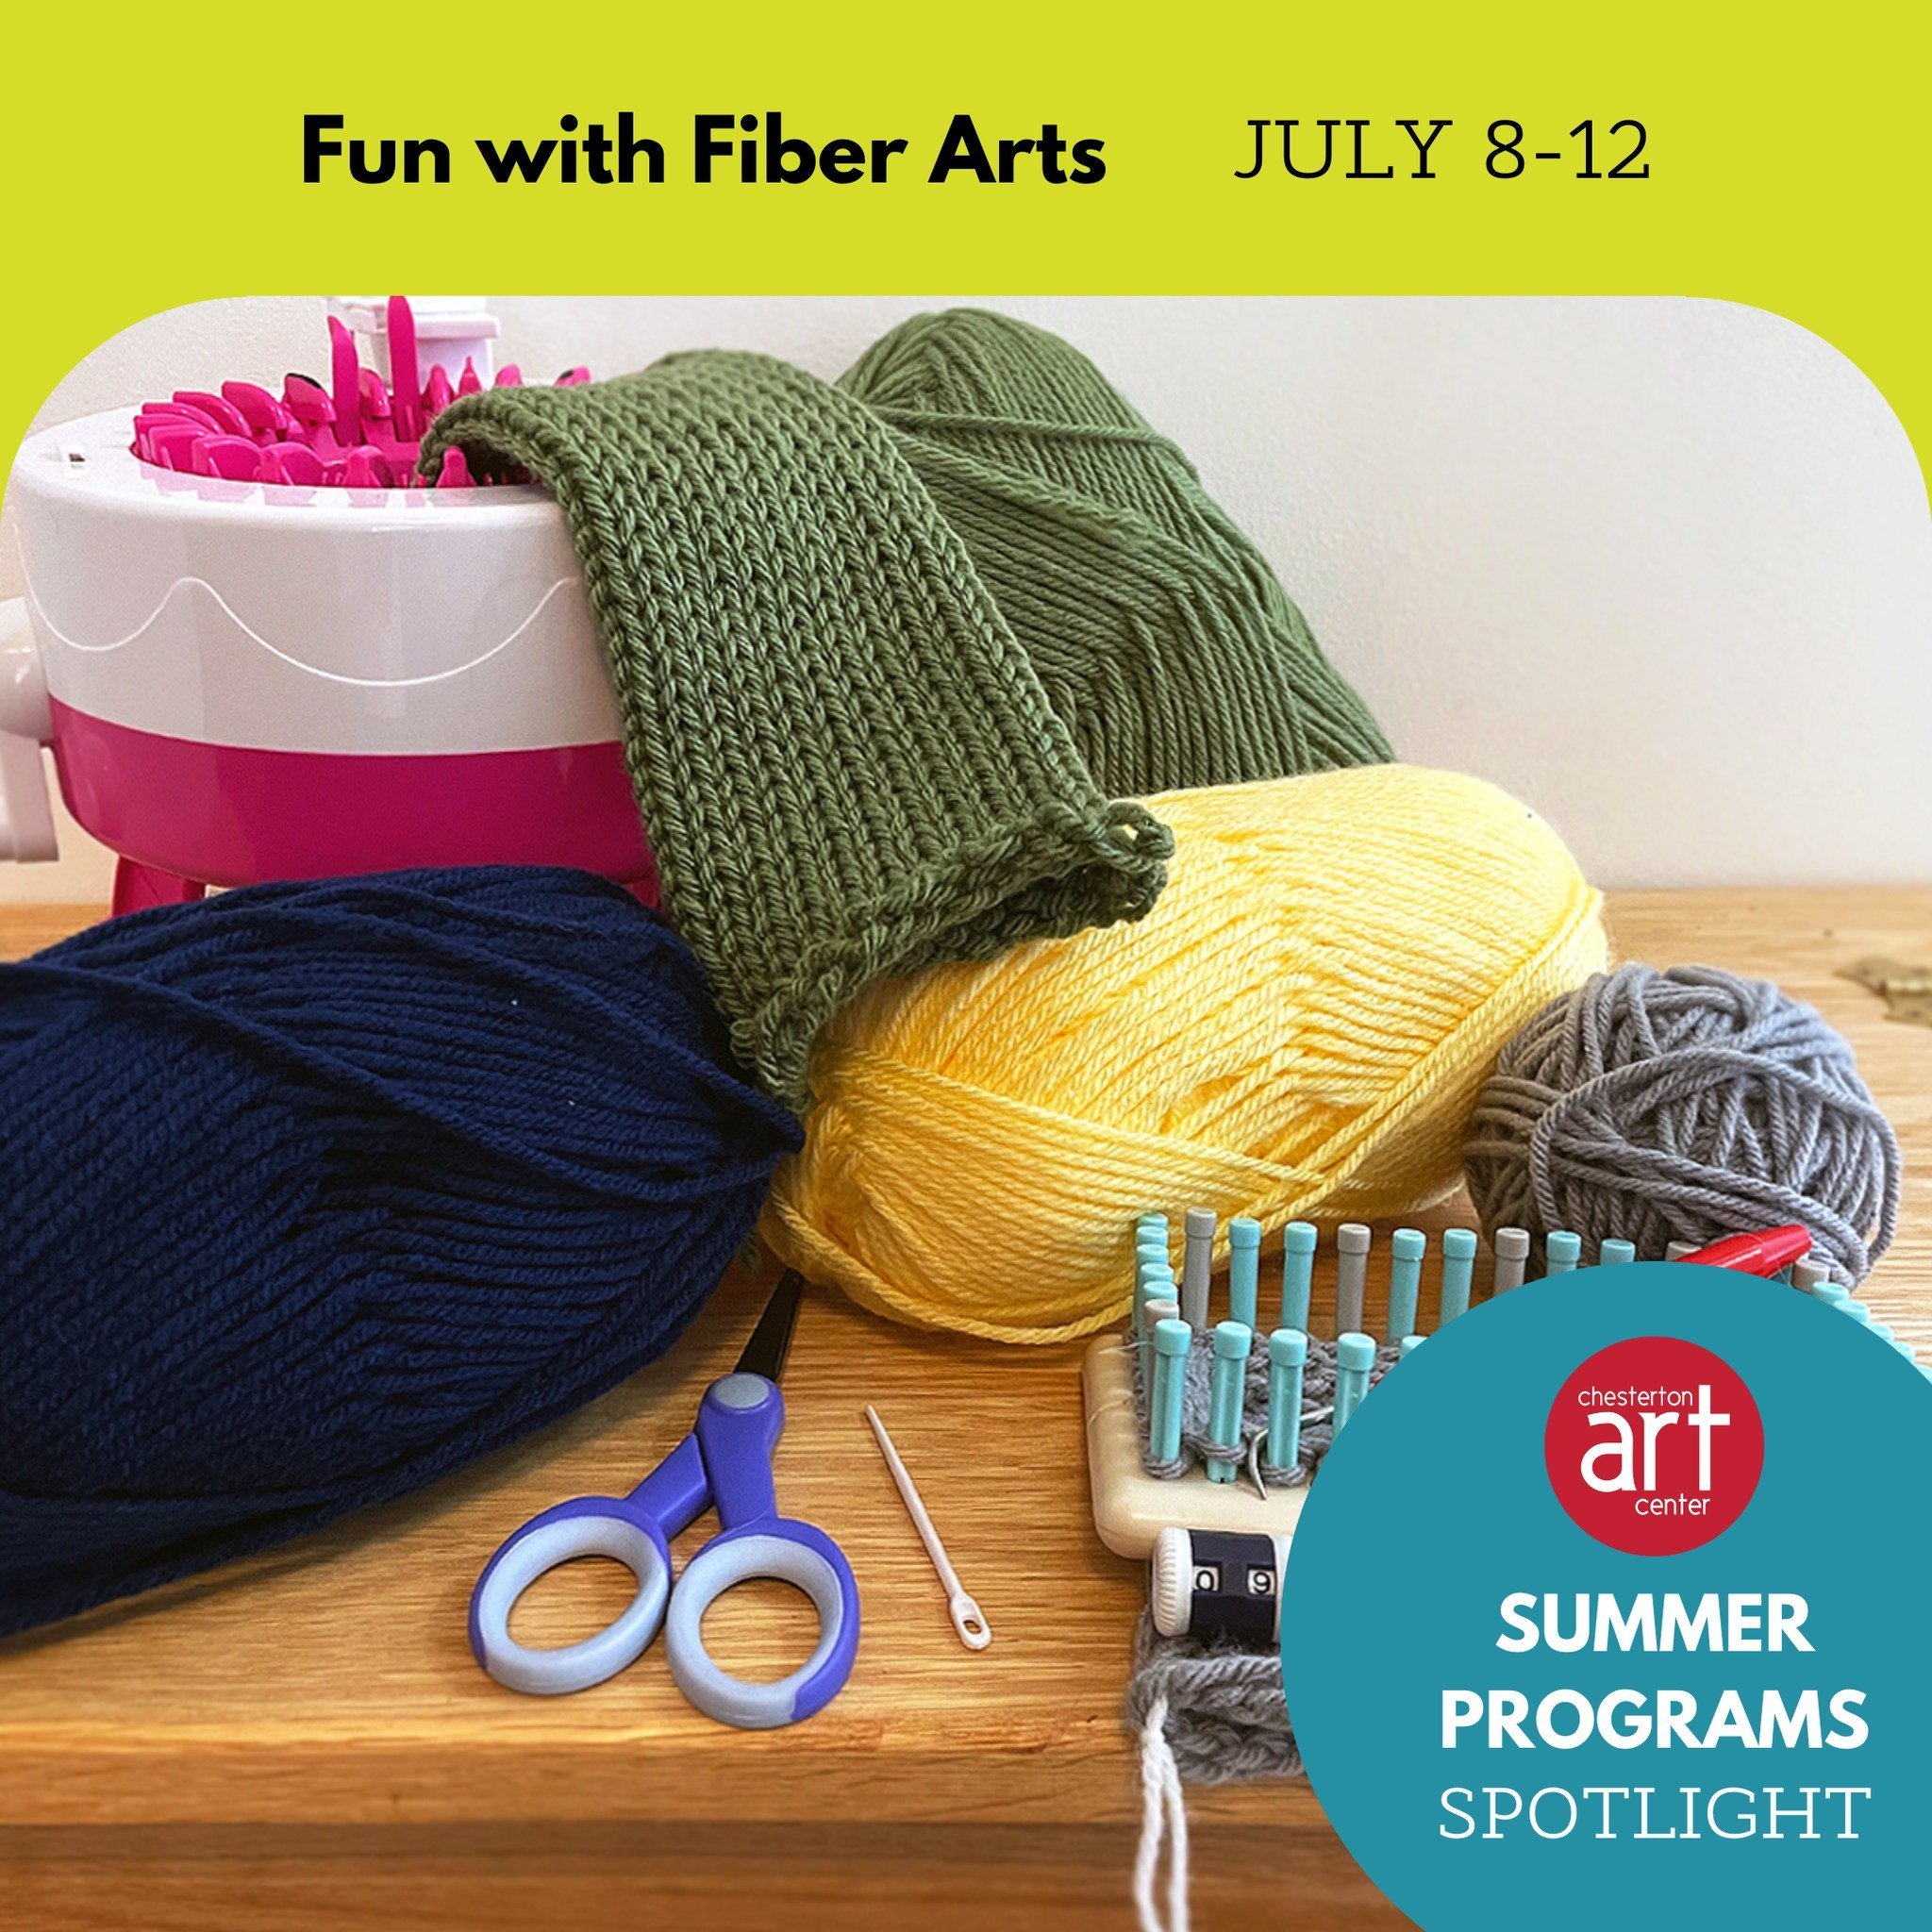 This week's Summer Program Spotlight features the Fun with Fiber Arts Summer Art Camp, perfect for those with an interest in learning about the traditional craft of fiber!

🟢 Fun with Fiber Art / July 8-12 / Ages 9-12 from 8:30-11 AM / Instructor Ma